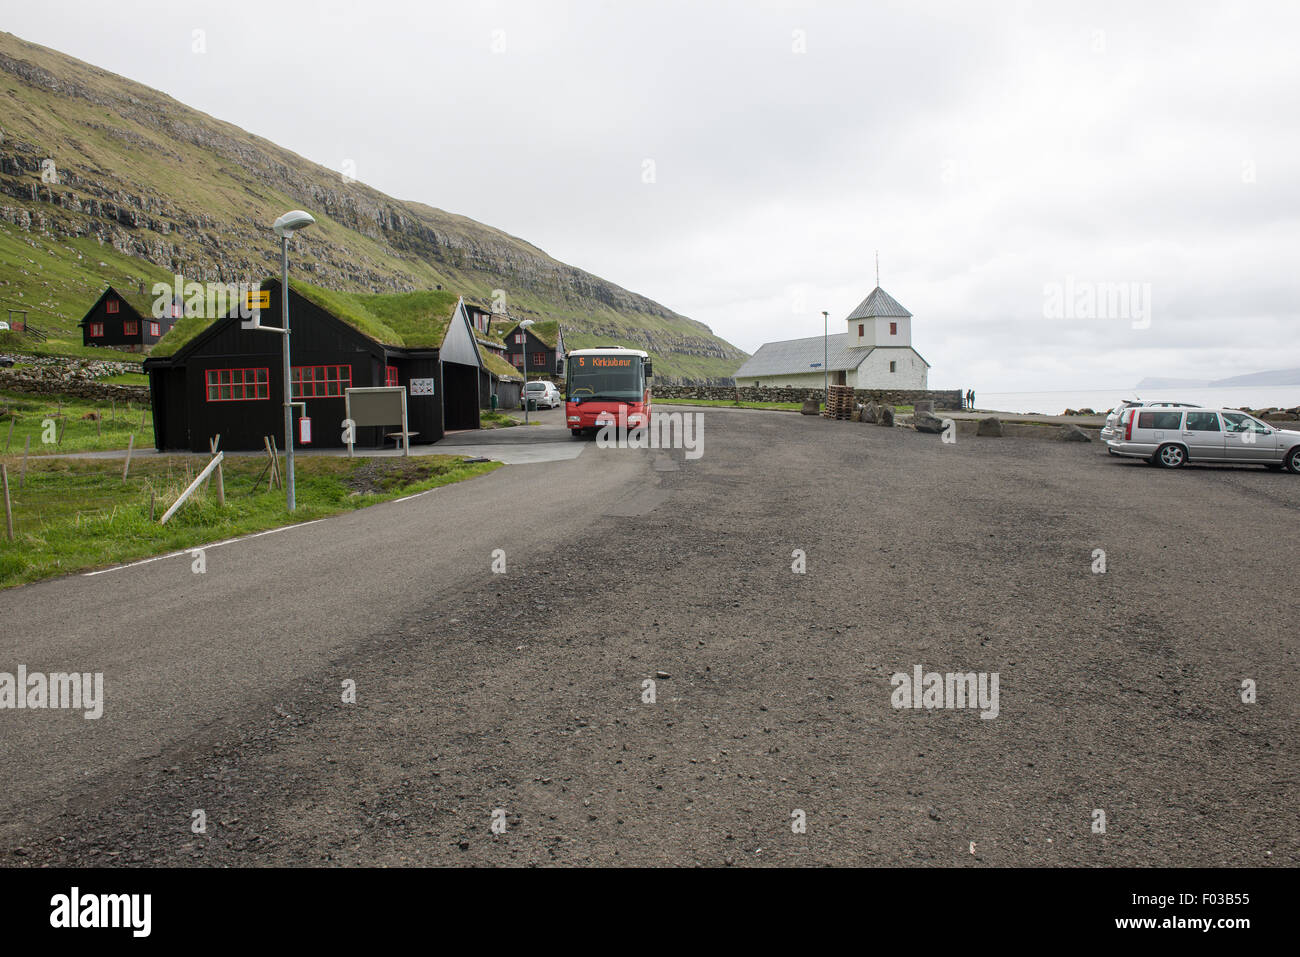 Kirkjubøur on the Faroe Islands with typical houses, church and bus Stock Photo